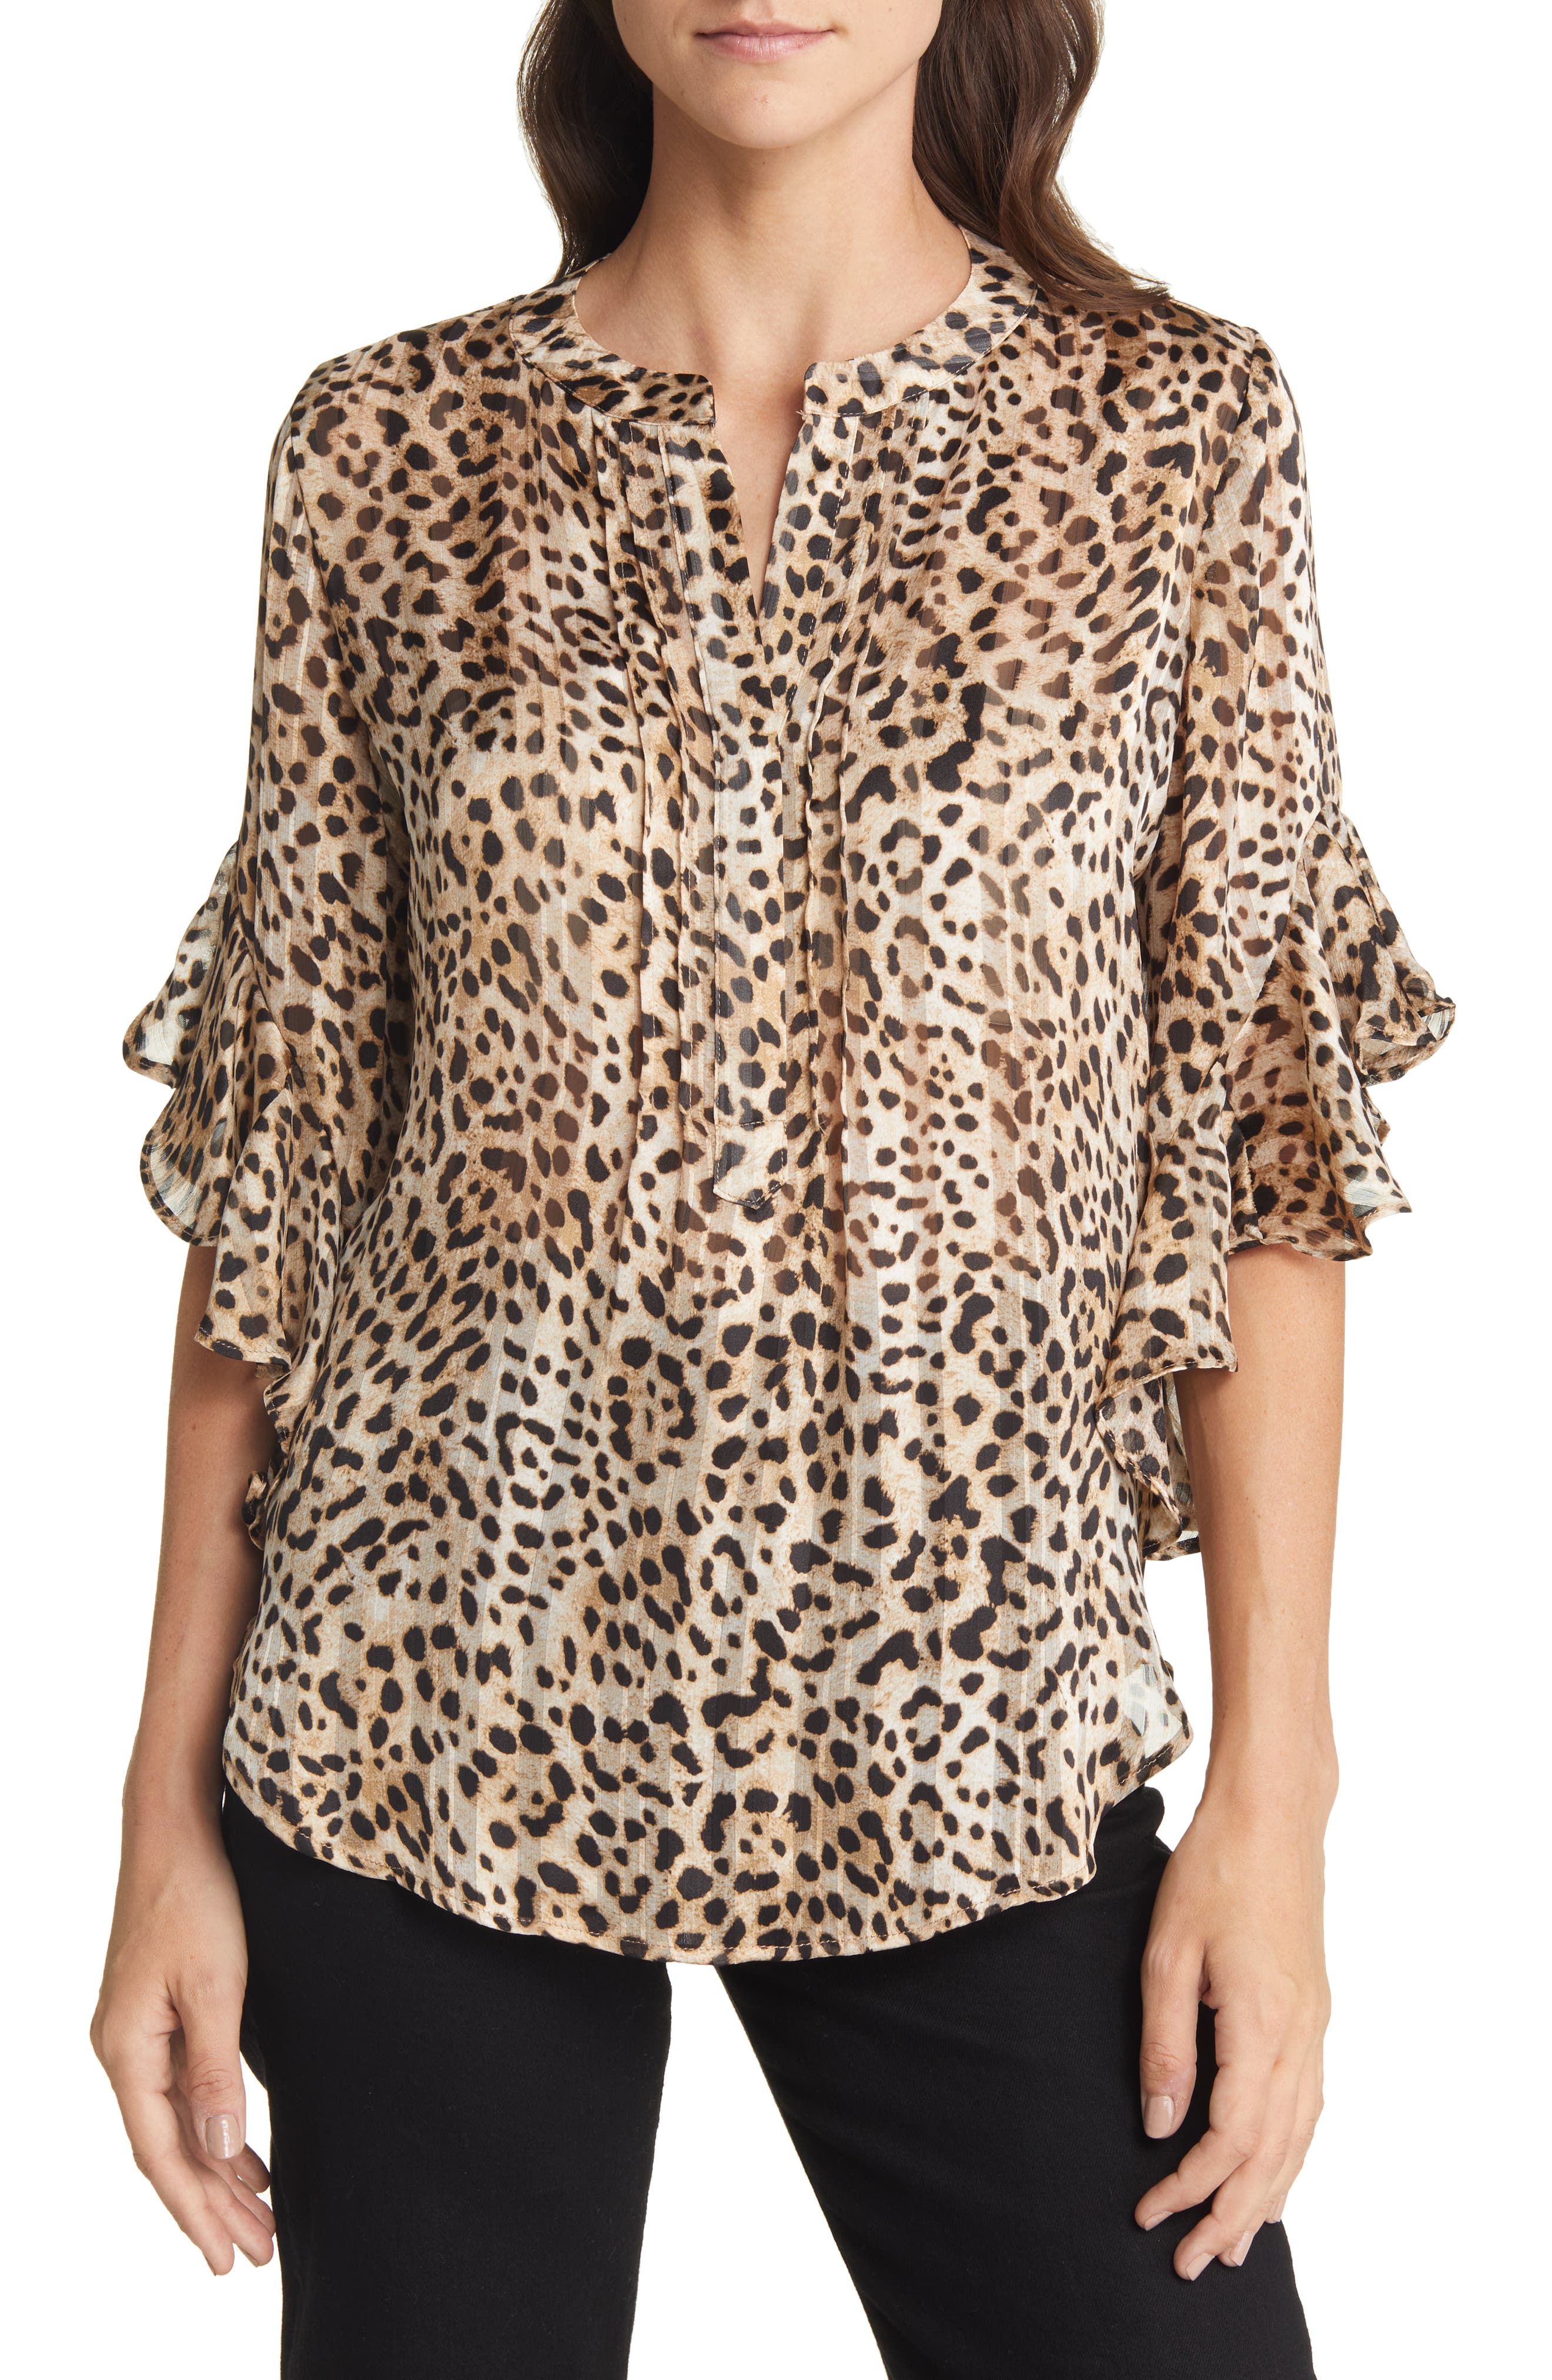 Fashion Blouses Ruffled Blouses Scotch & Soda Ruffled Blouse brown-black leopard pattern casual look 